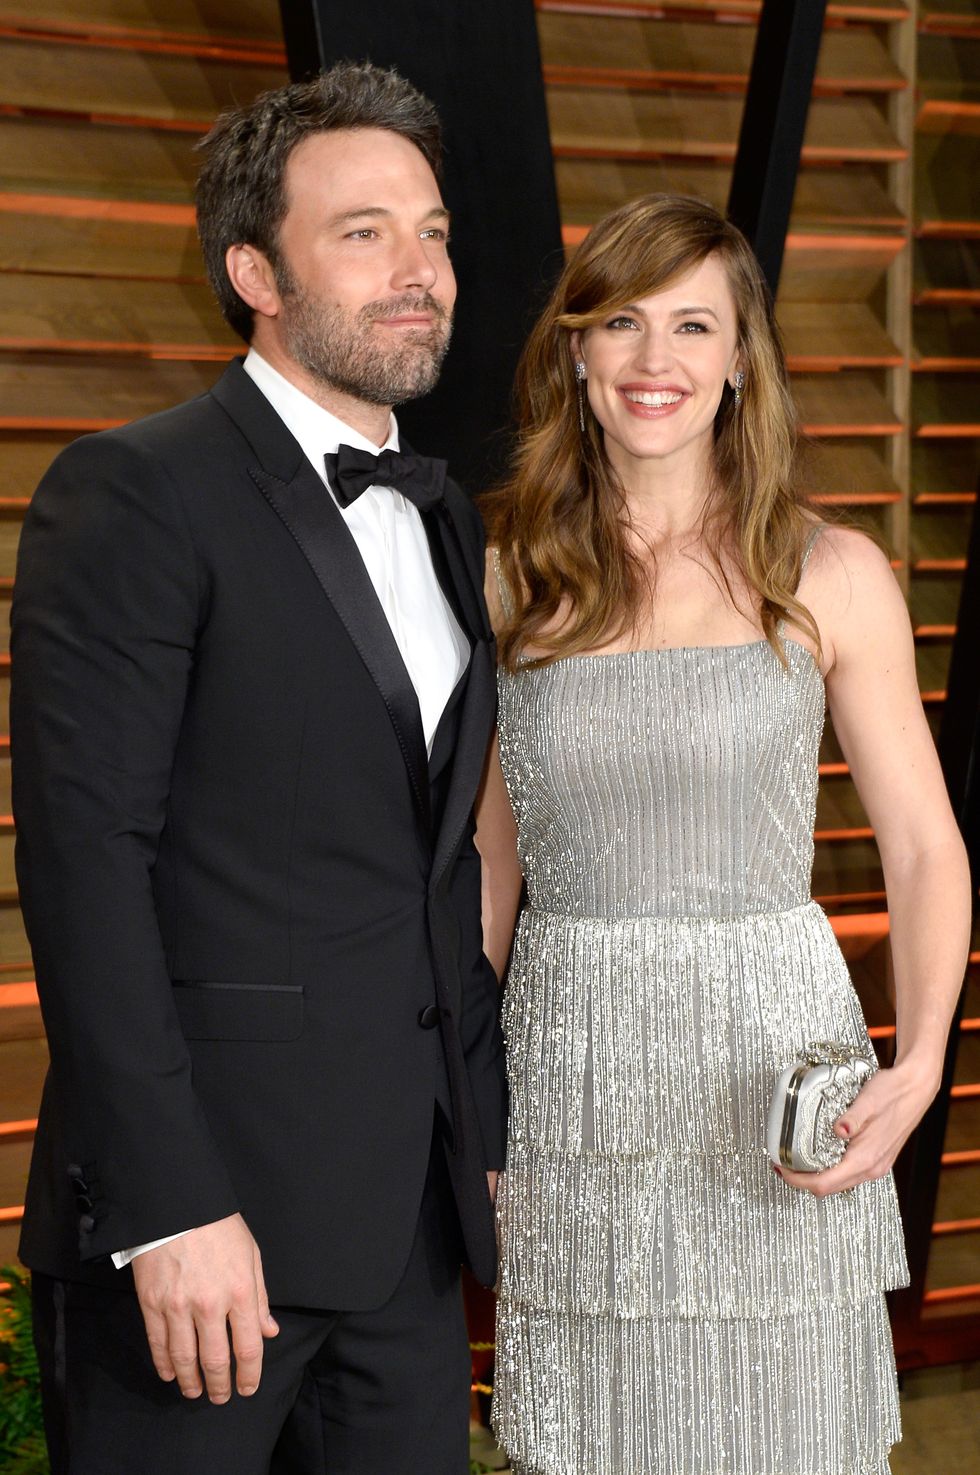 WEST HOLLYWOOD, CA - MARCH 02:  Actors Ben Affleck (L) and Jennifer Garner attend the 2014 Vanity Fair Oscar Party hosted by Graydon Carter on March 2, 2014 in West Hollywood, California.  (Photo by Pascal Le Segretain/Getty Images)